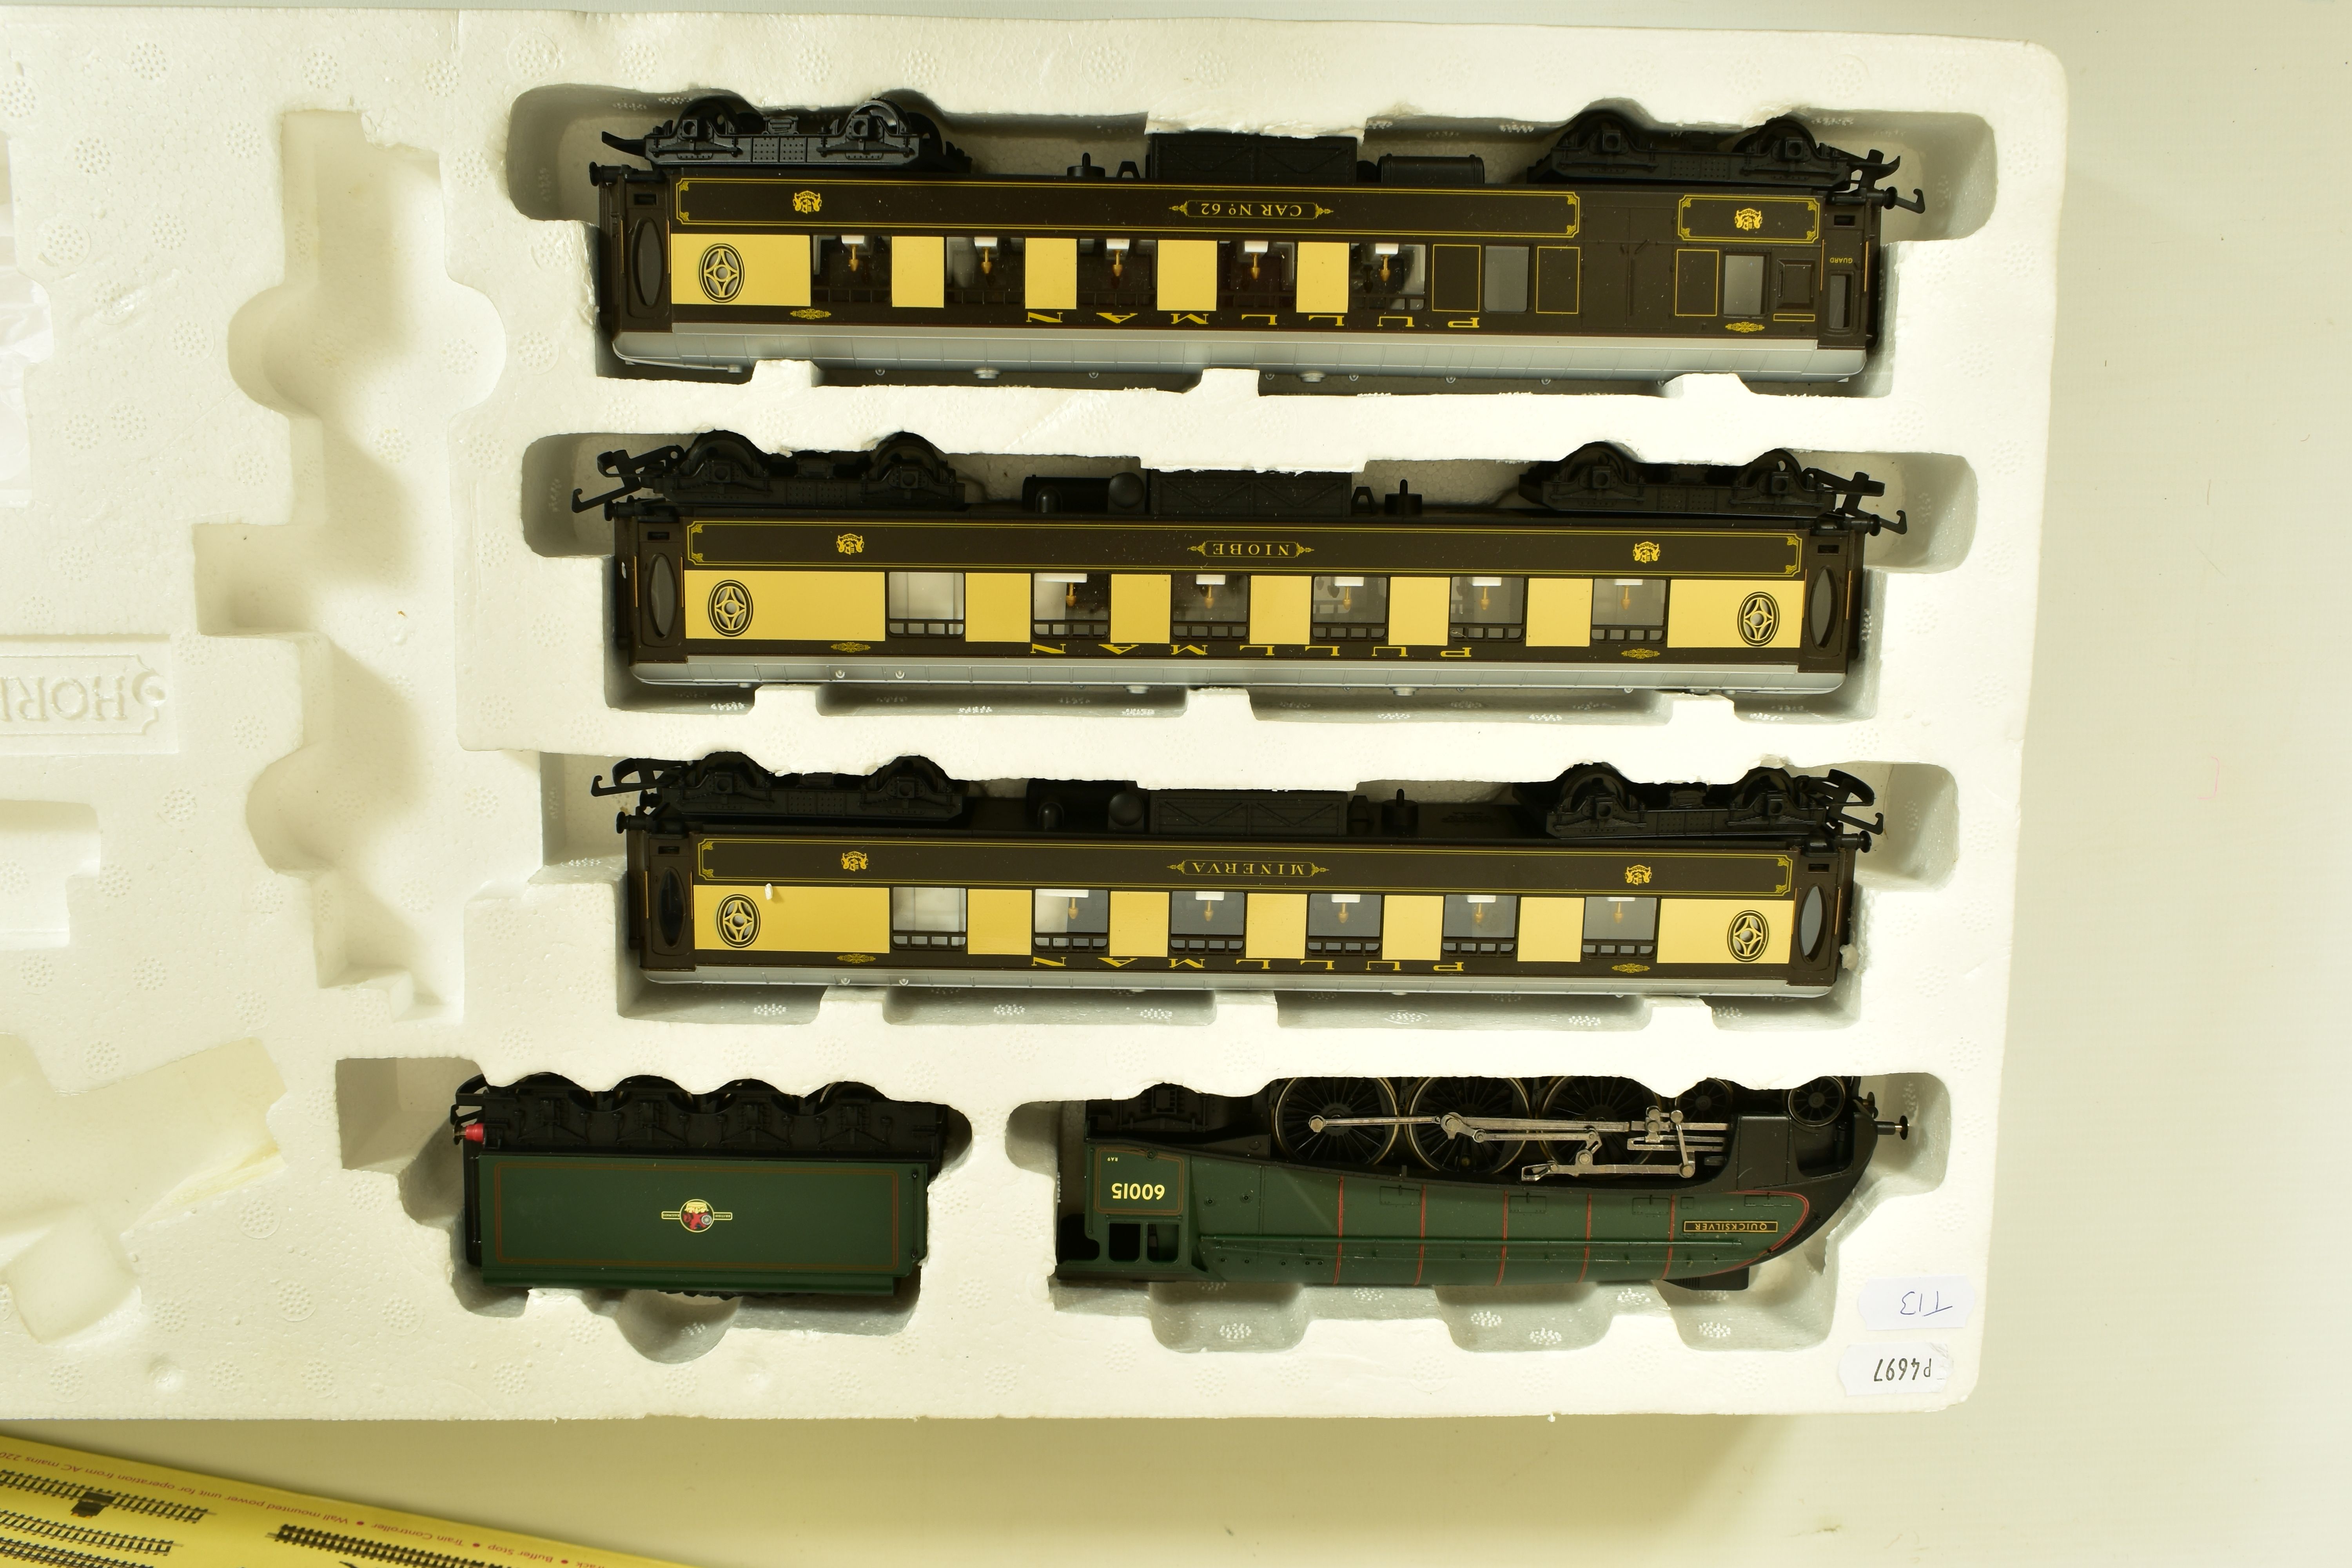 A BOXED HORNBY RAILWAYS OO GAUGE YORKSHIRE PULLMAN TRAIN SET - Image 2 of 15